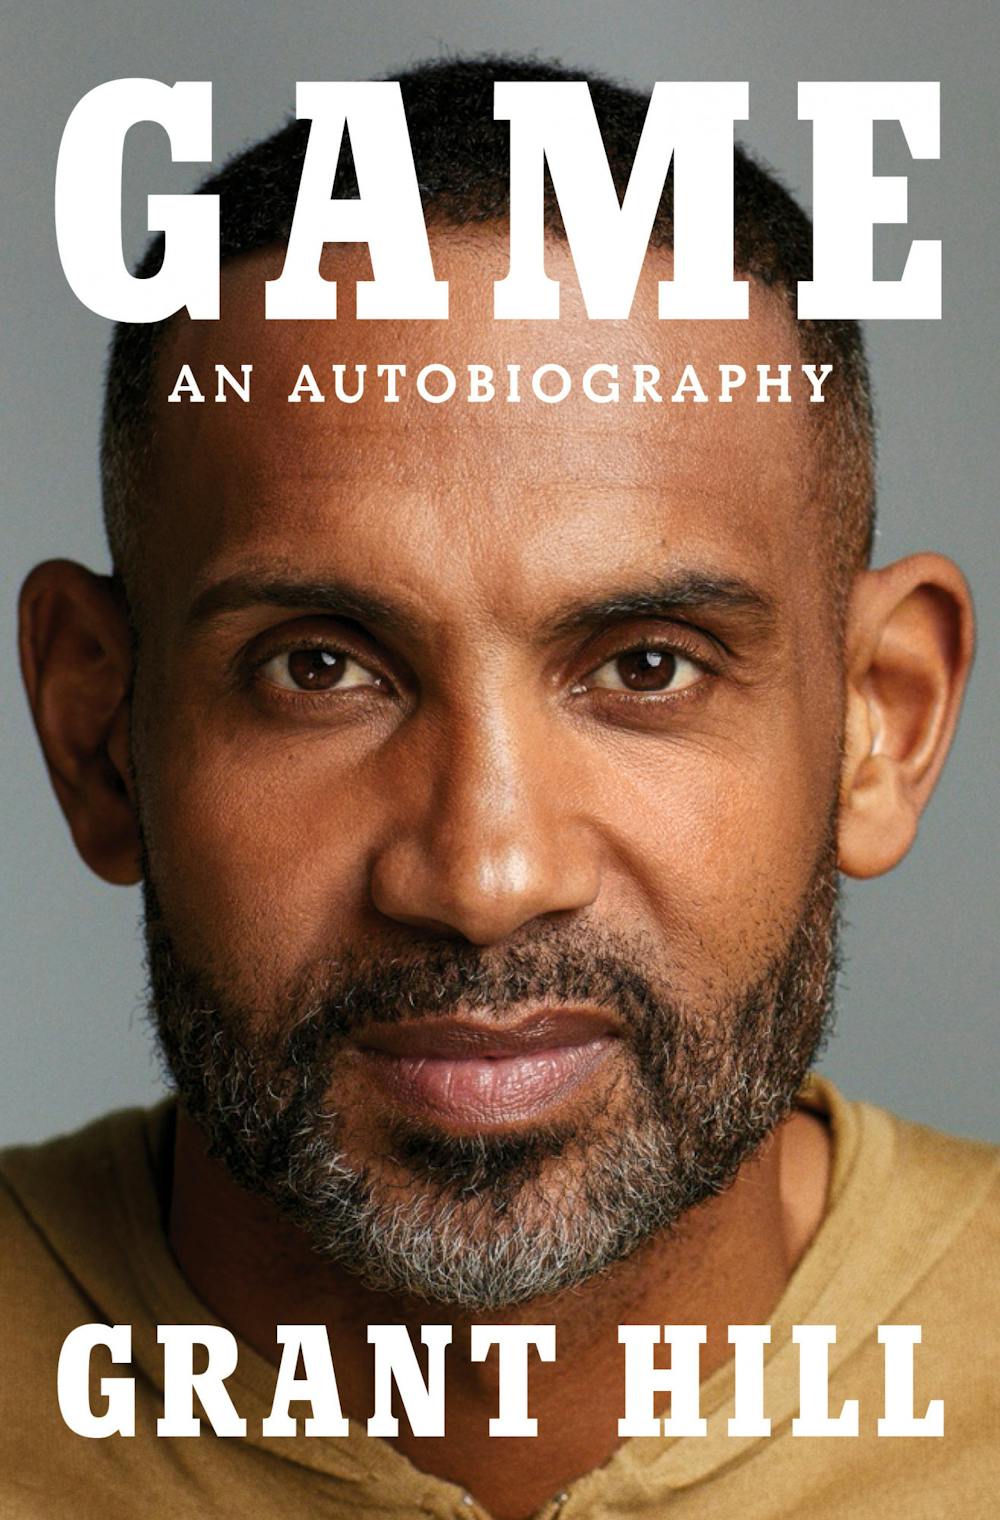 <p>Grant Hill will speak Wednesday evening at Duke about "Game," his new autobiography.</p>